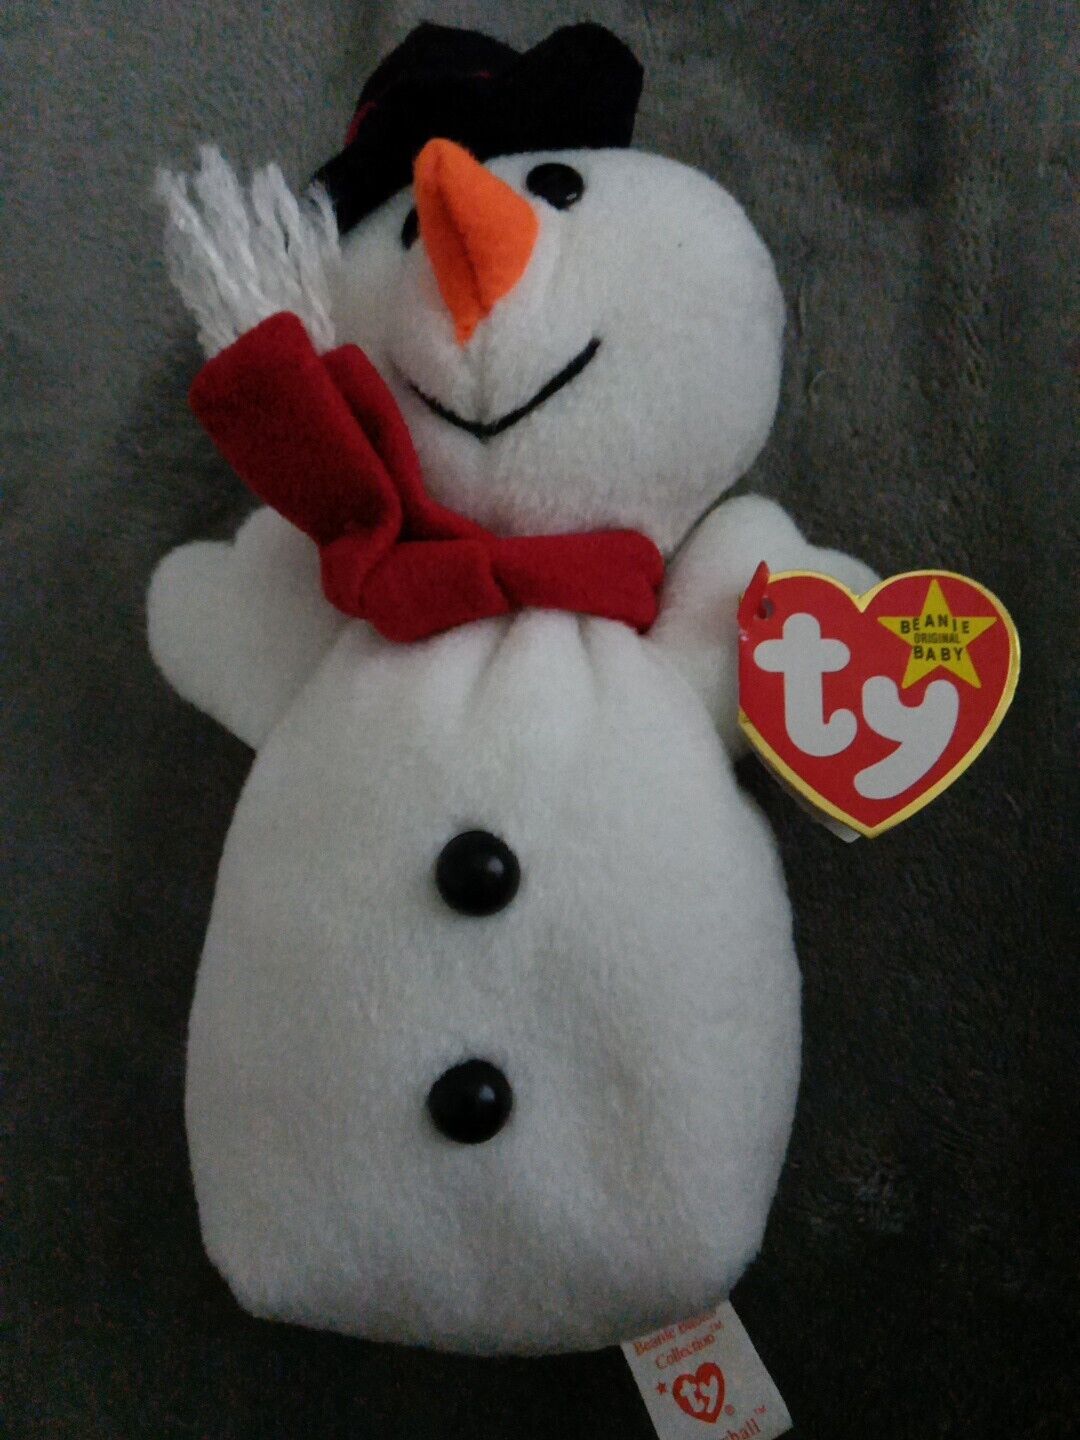 1996 Ty Beanie Baby Snowball with Style #4201